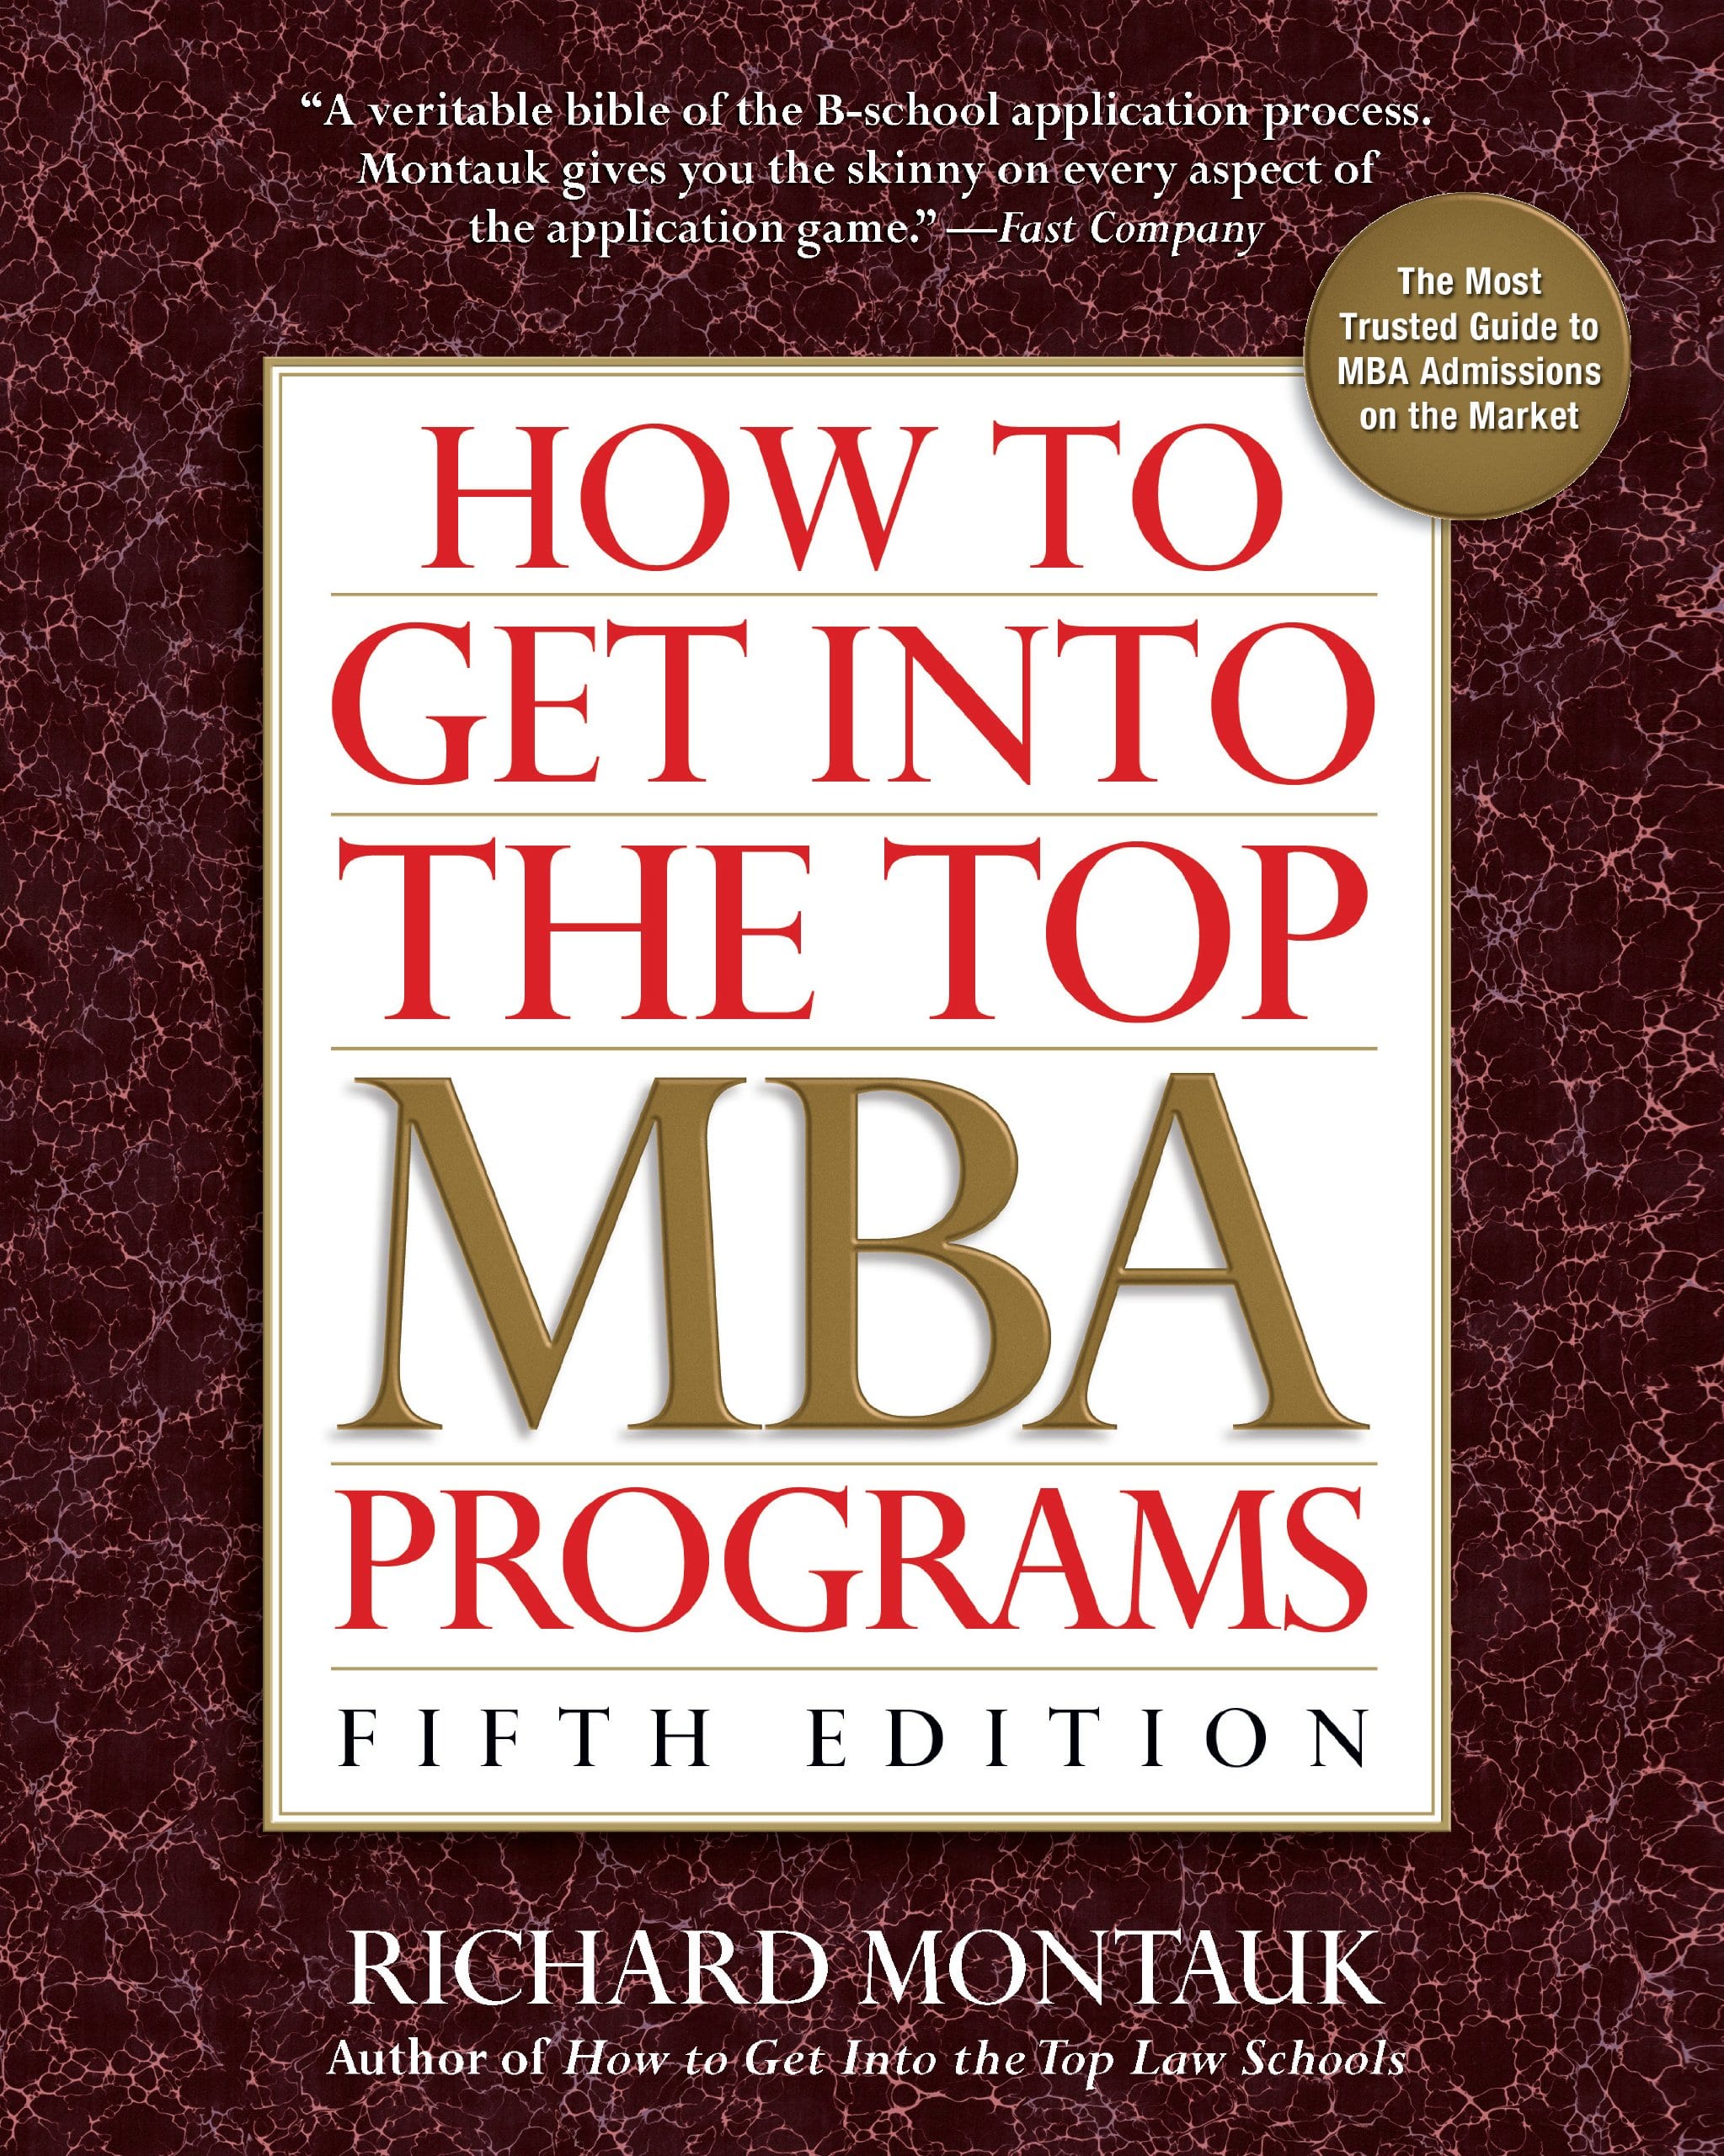 Which MBA course has the highest demand in the US?